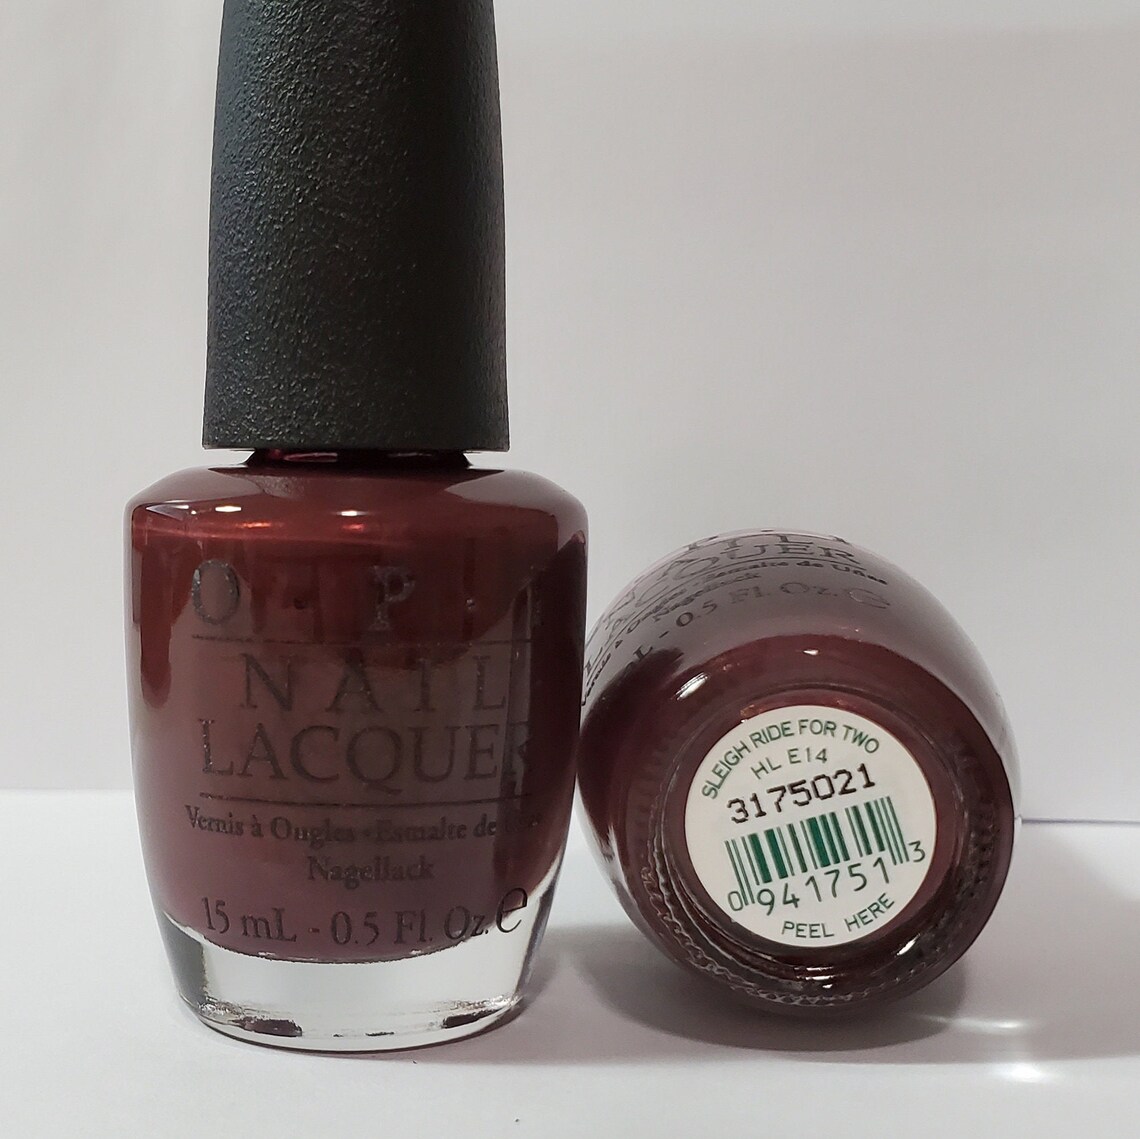 OPI Nail Lacquer- Sleigh Ride for Two HL E14 Mariah Carey Collection for Holiday 2013